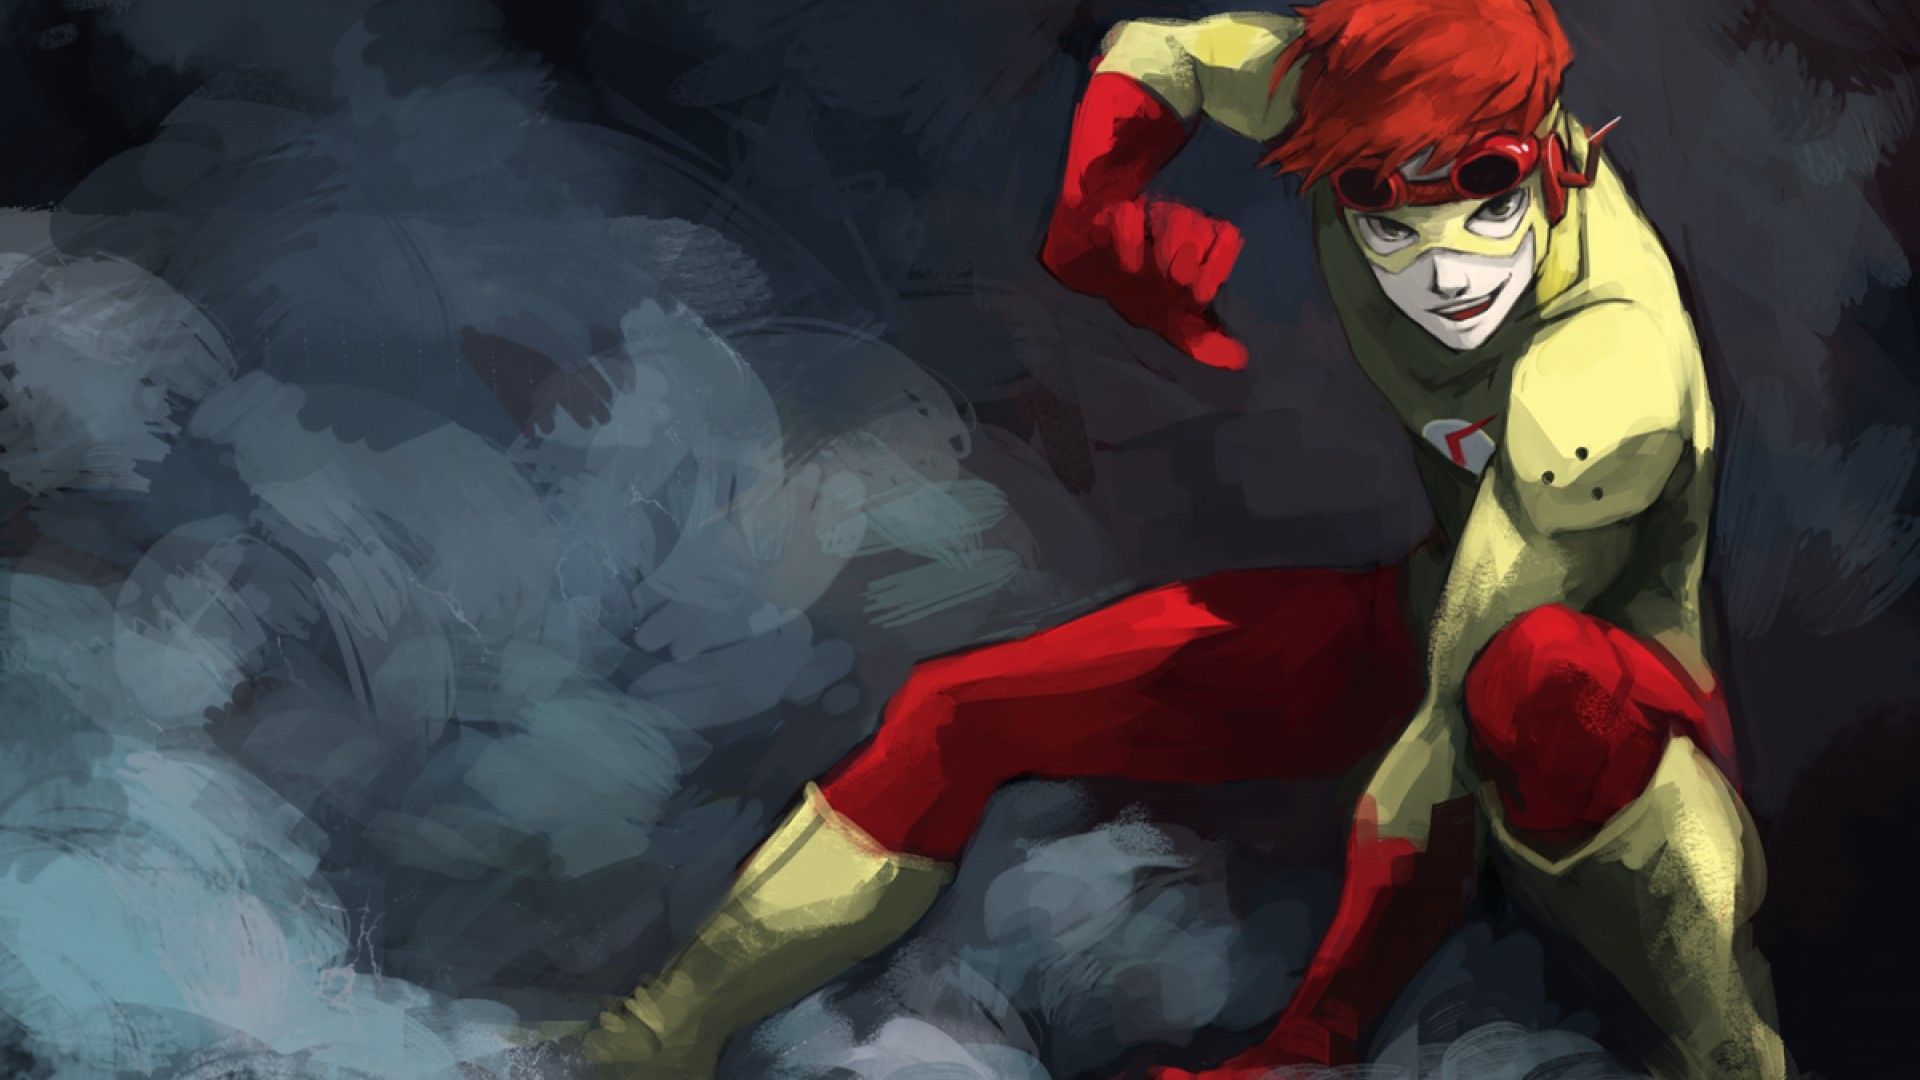 Wally West Background. Old West Wallpaper, Wally West Wallpaper and Old West Pistol Wallpaper